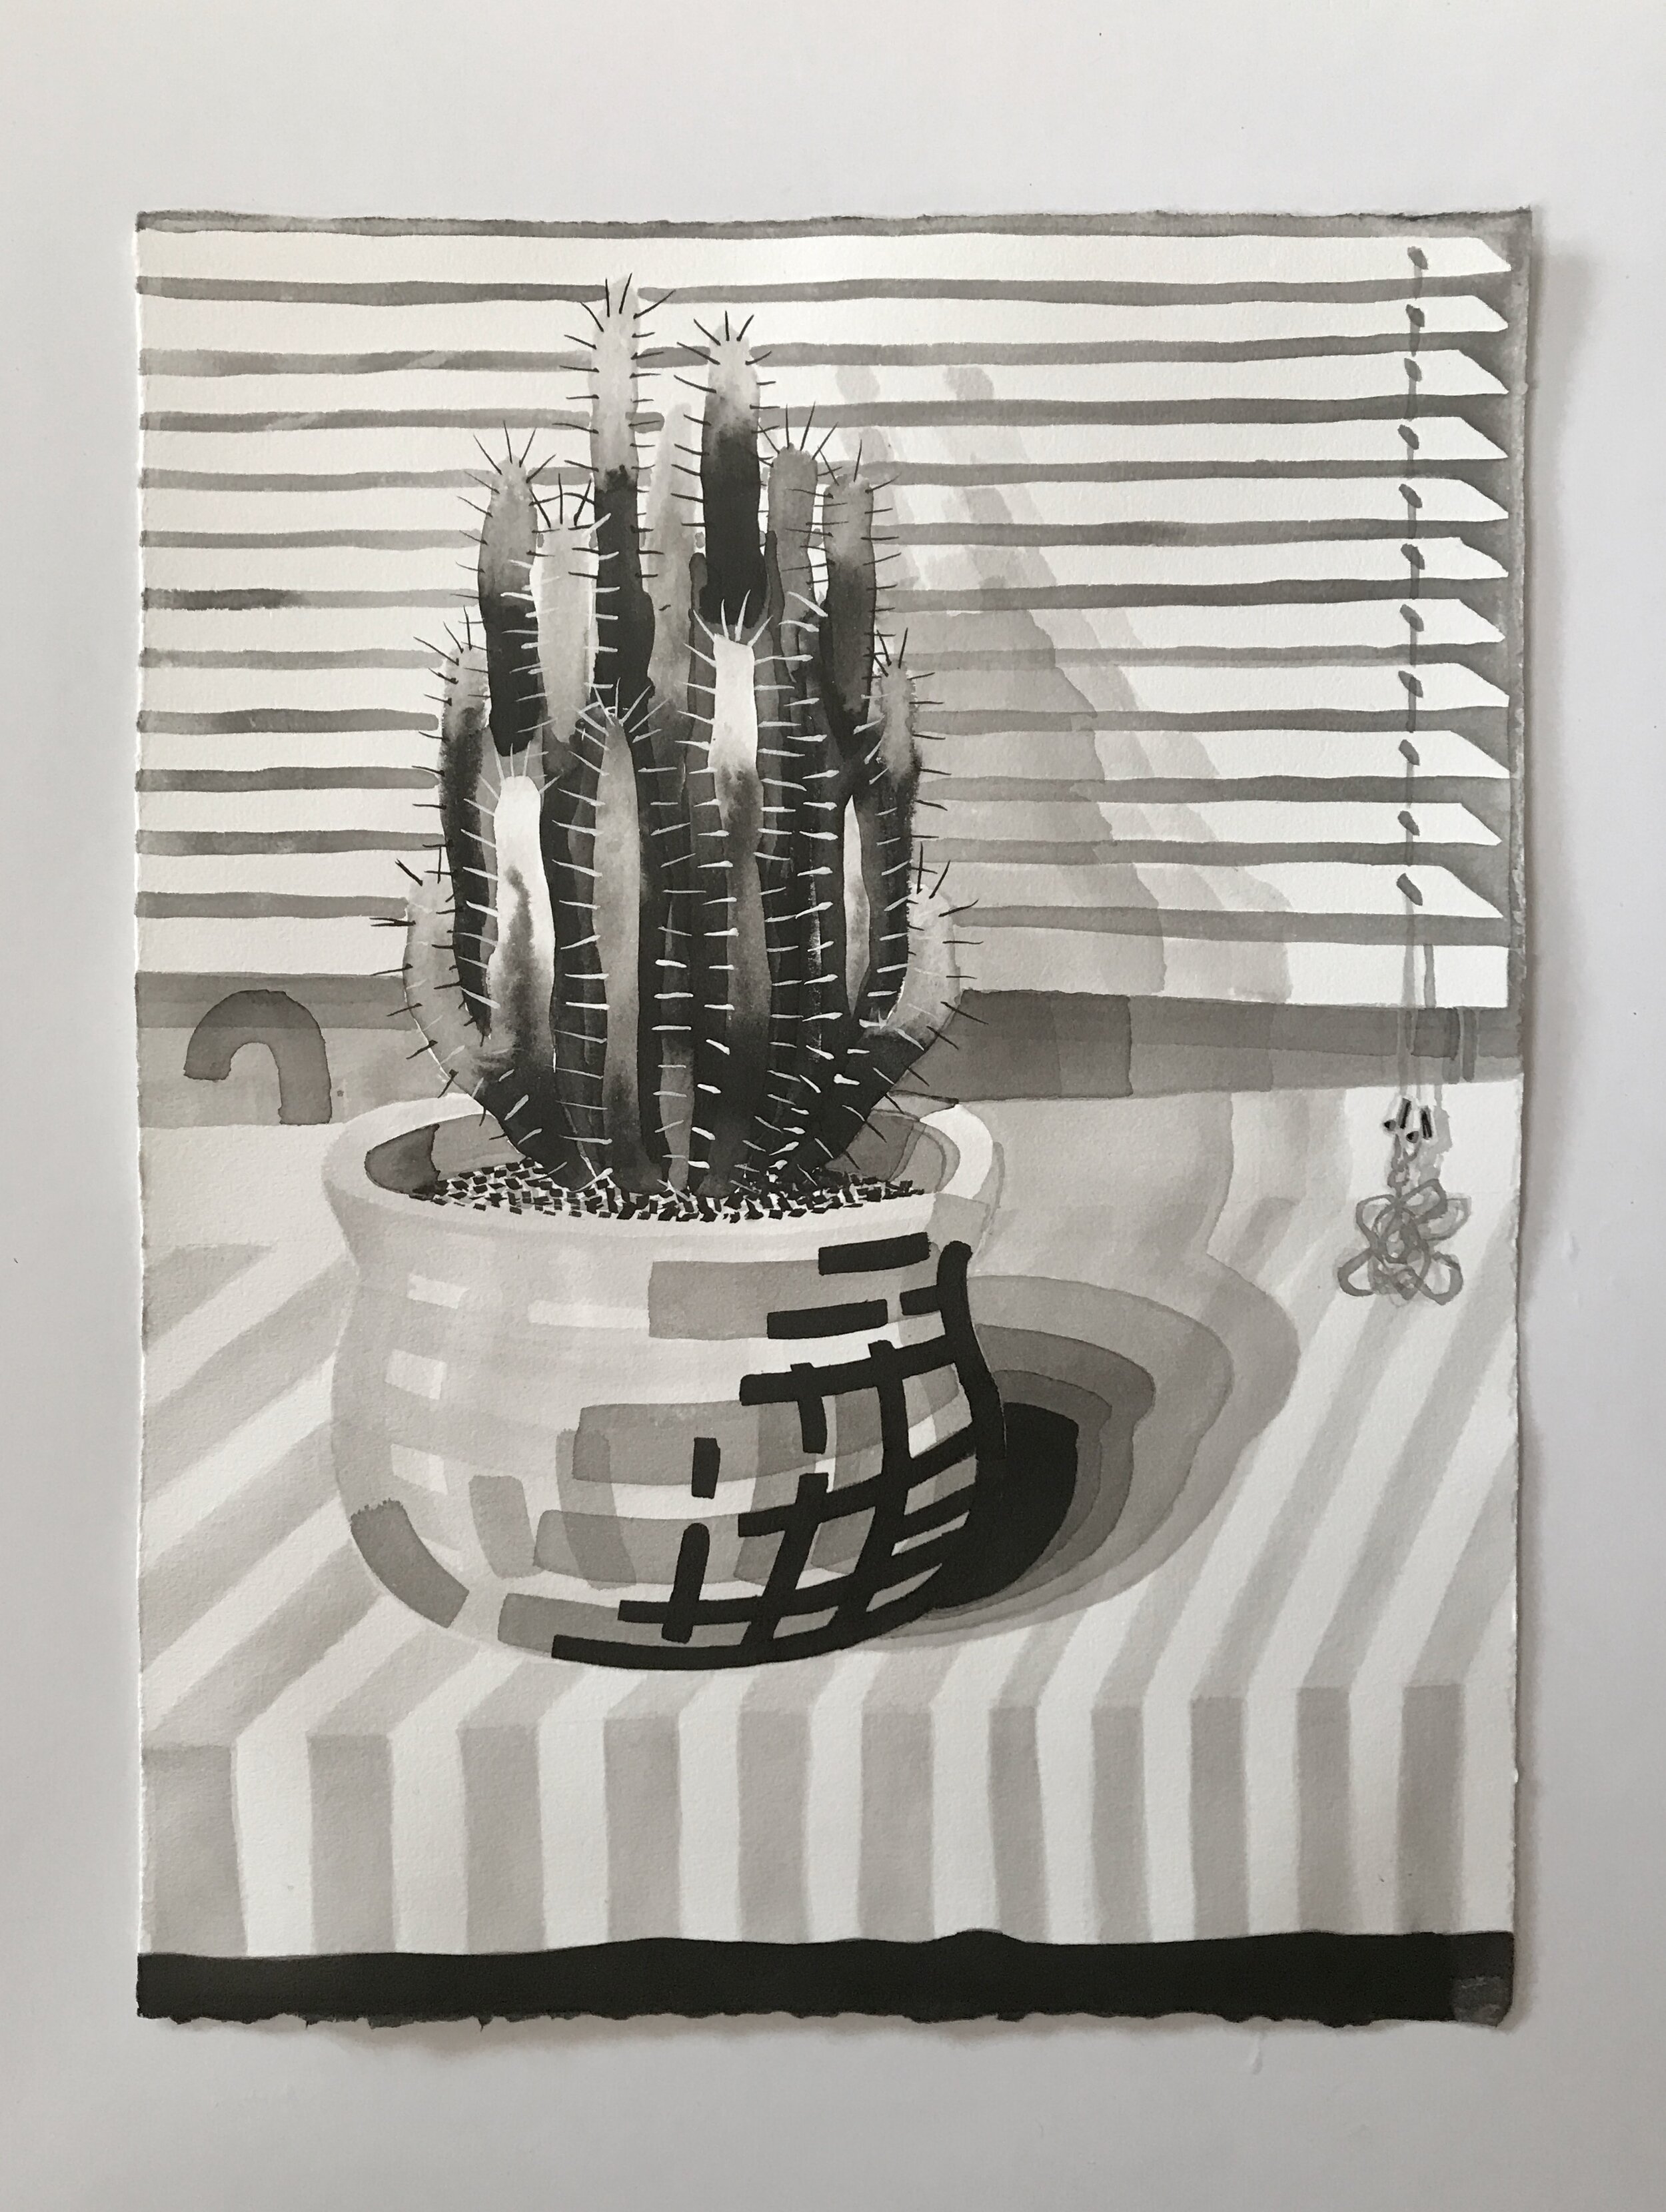 Untitled (memory of a cactus considering its options), 2018, ink and gesso on paper, 17.5 x 13.25 inches (Copy)